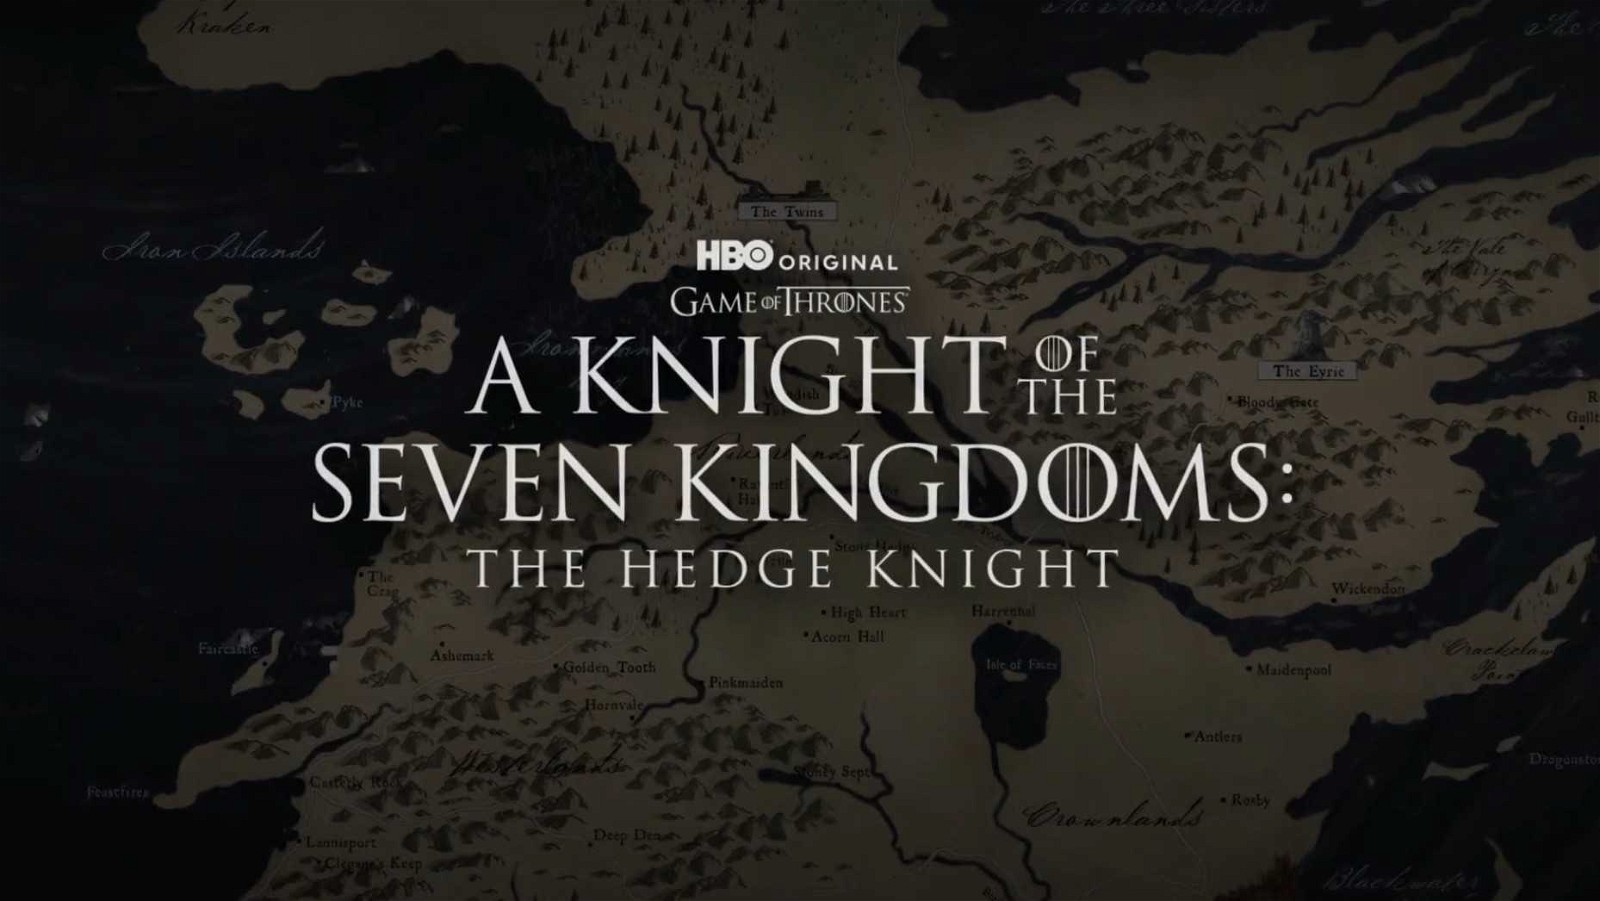 The Hedge Knight series will chrinicle the adventures of Ser Duncan the Tall and the Egg